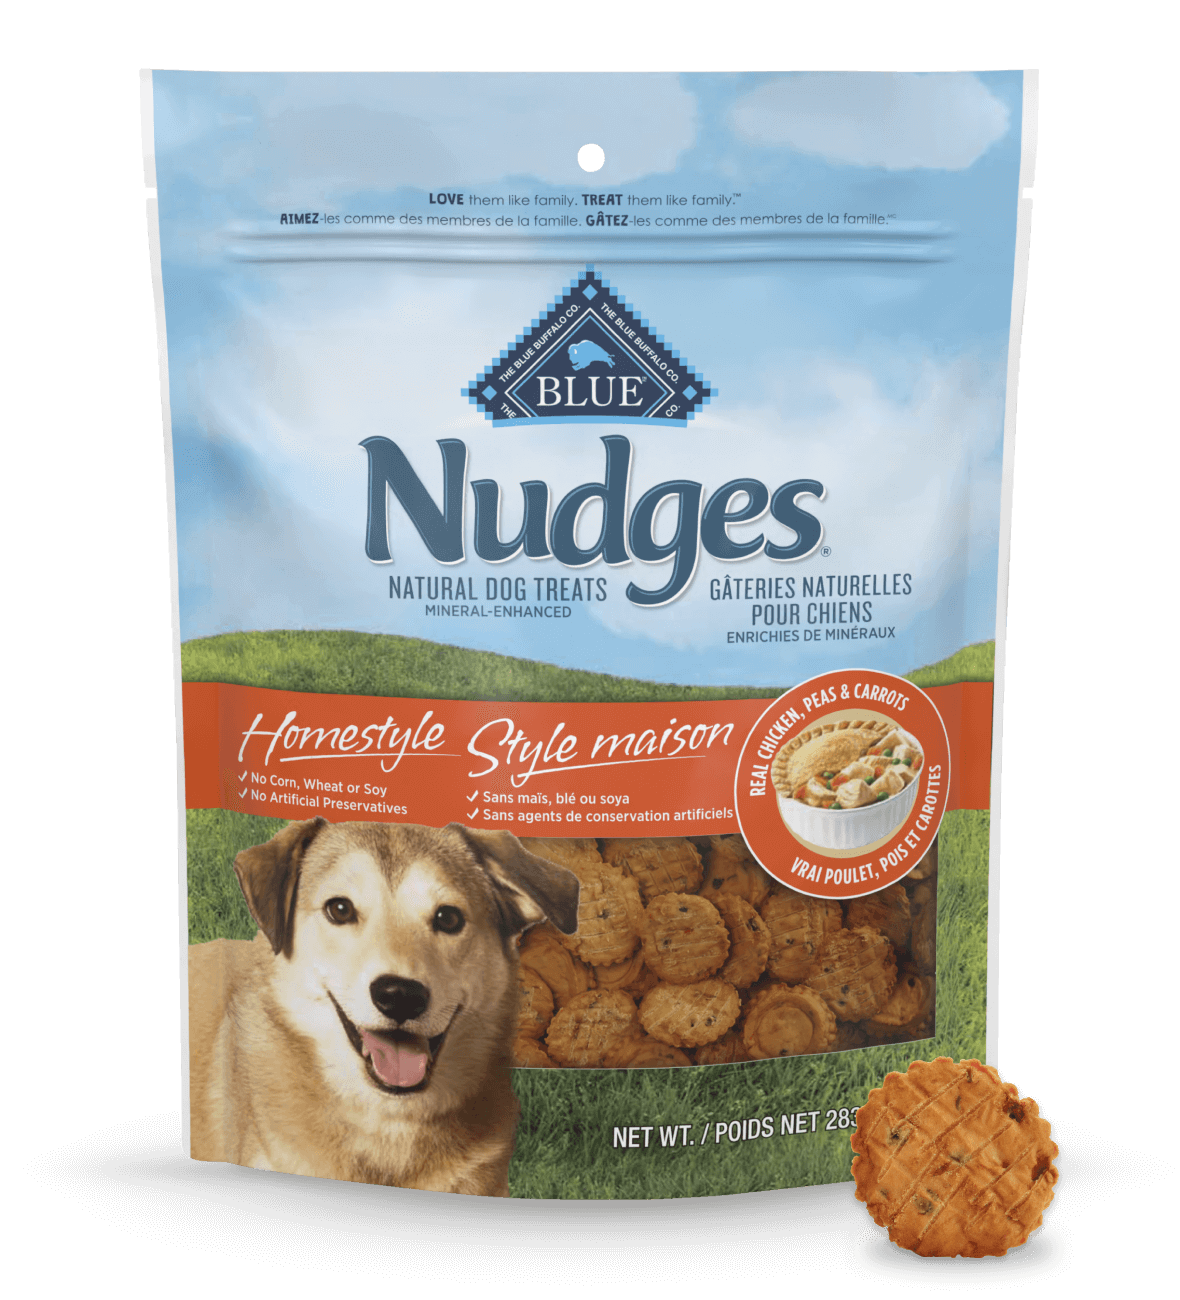 blue nudges ® homestyle treats with real chicken, peas & carrots dog treats